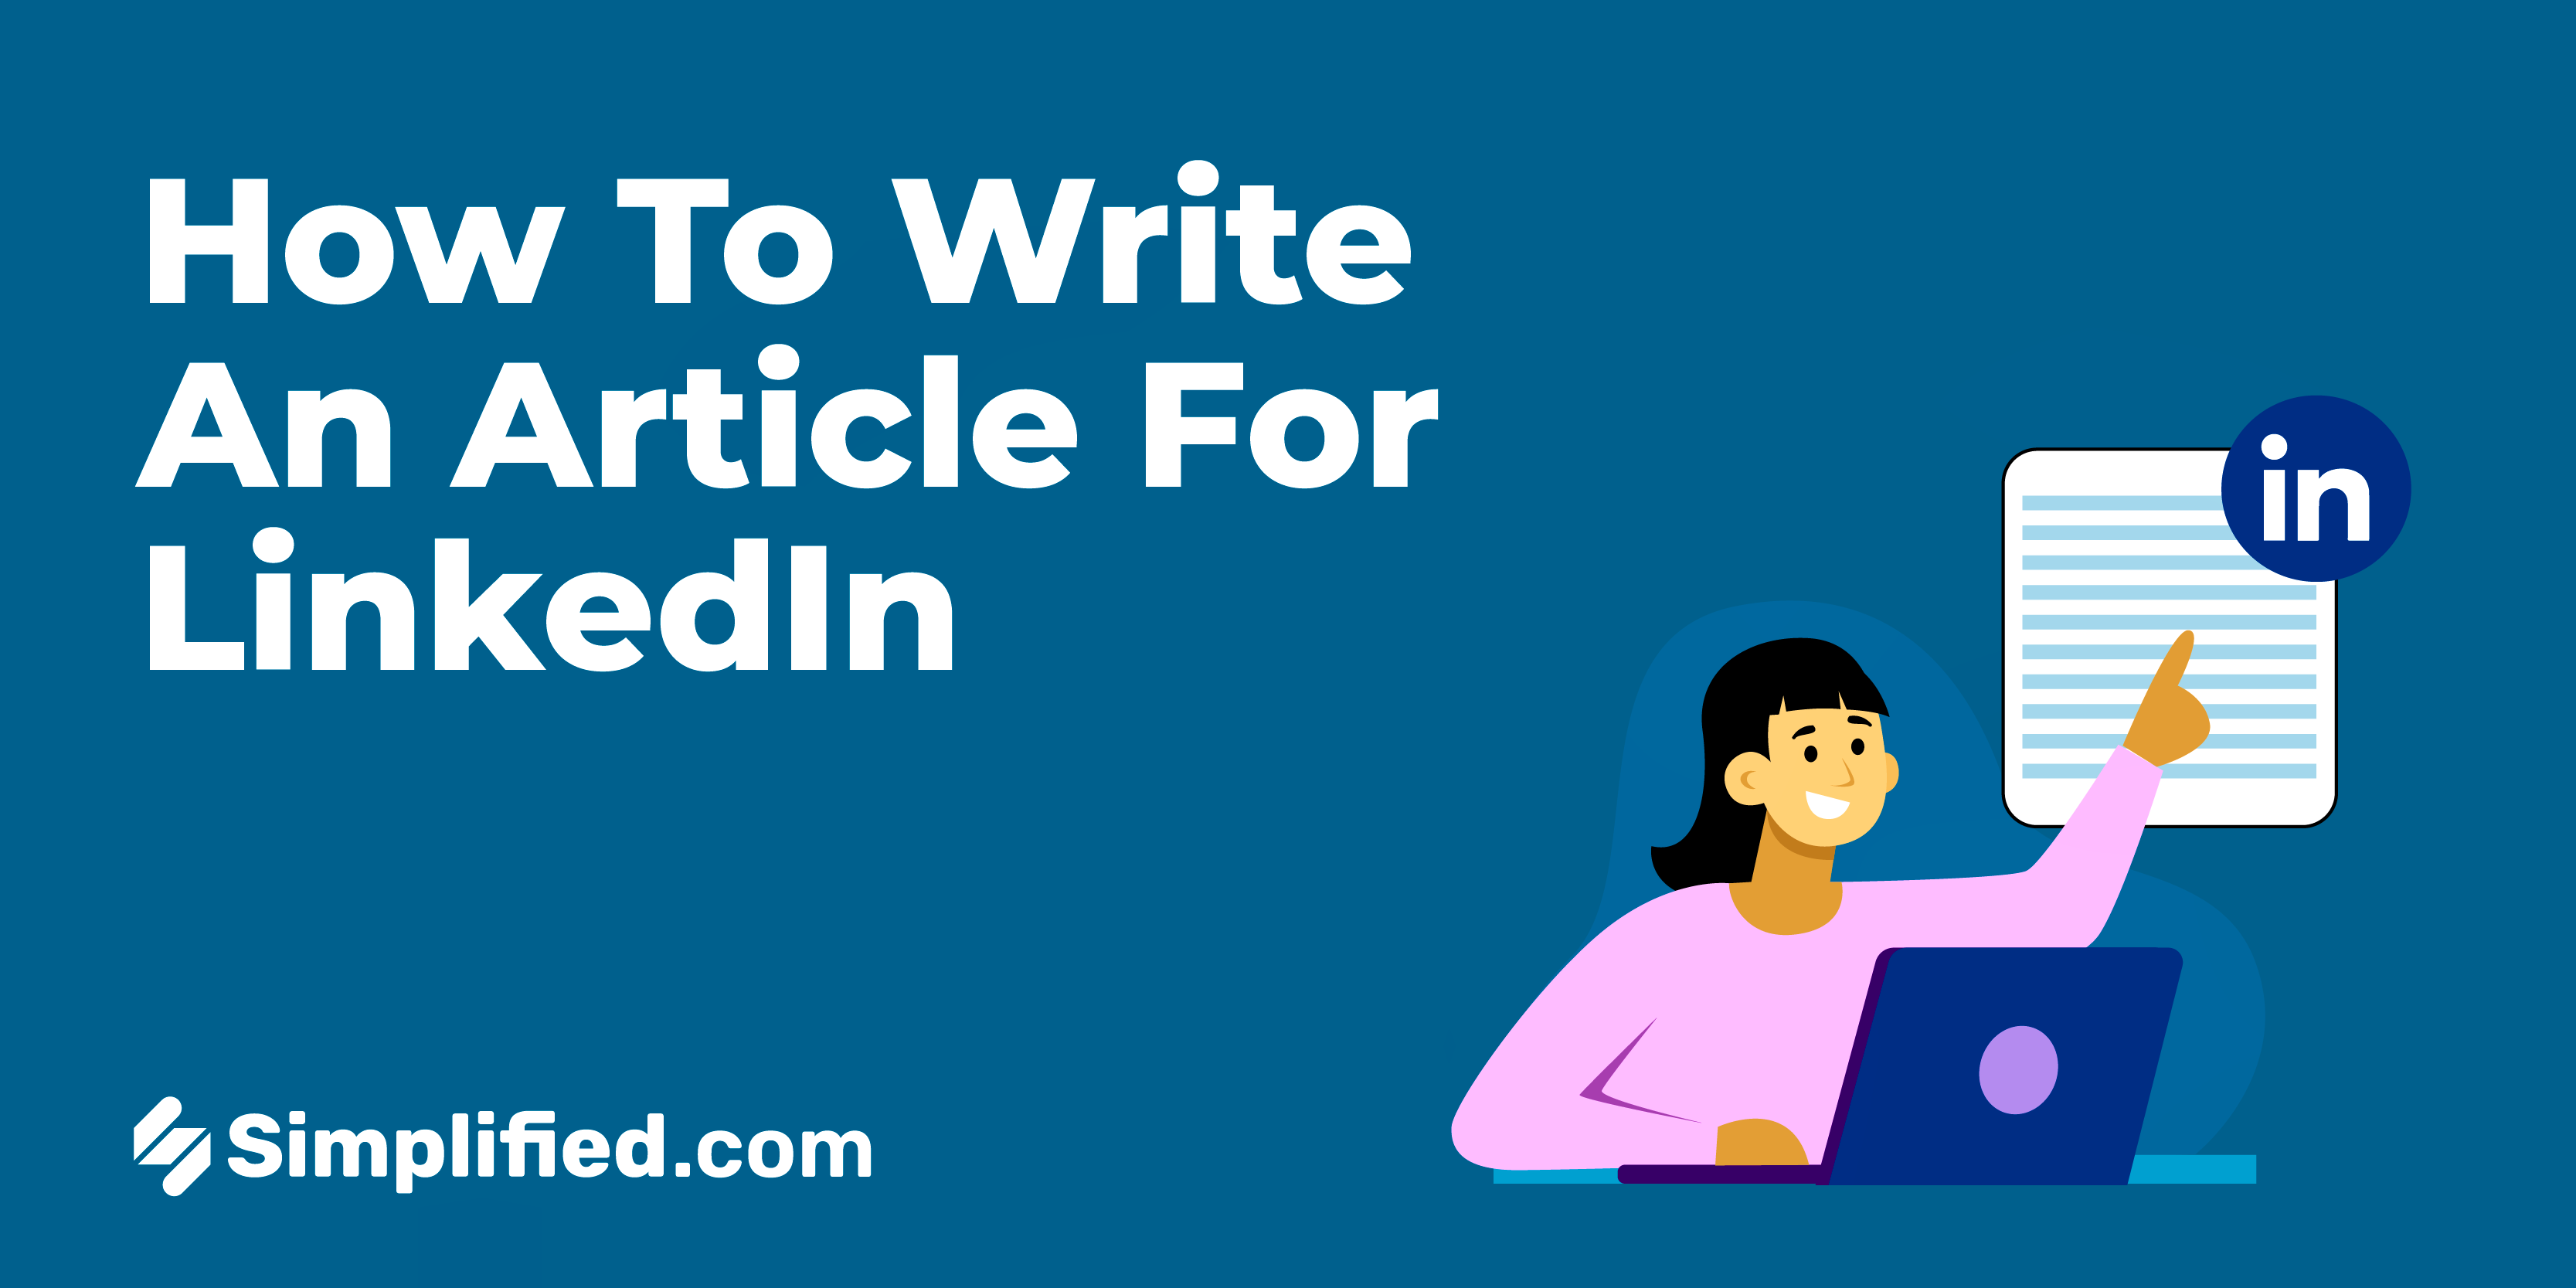 How To Write An Article For LinkedIn